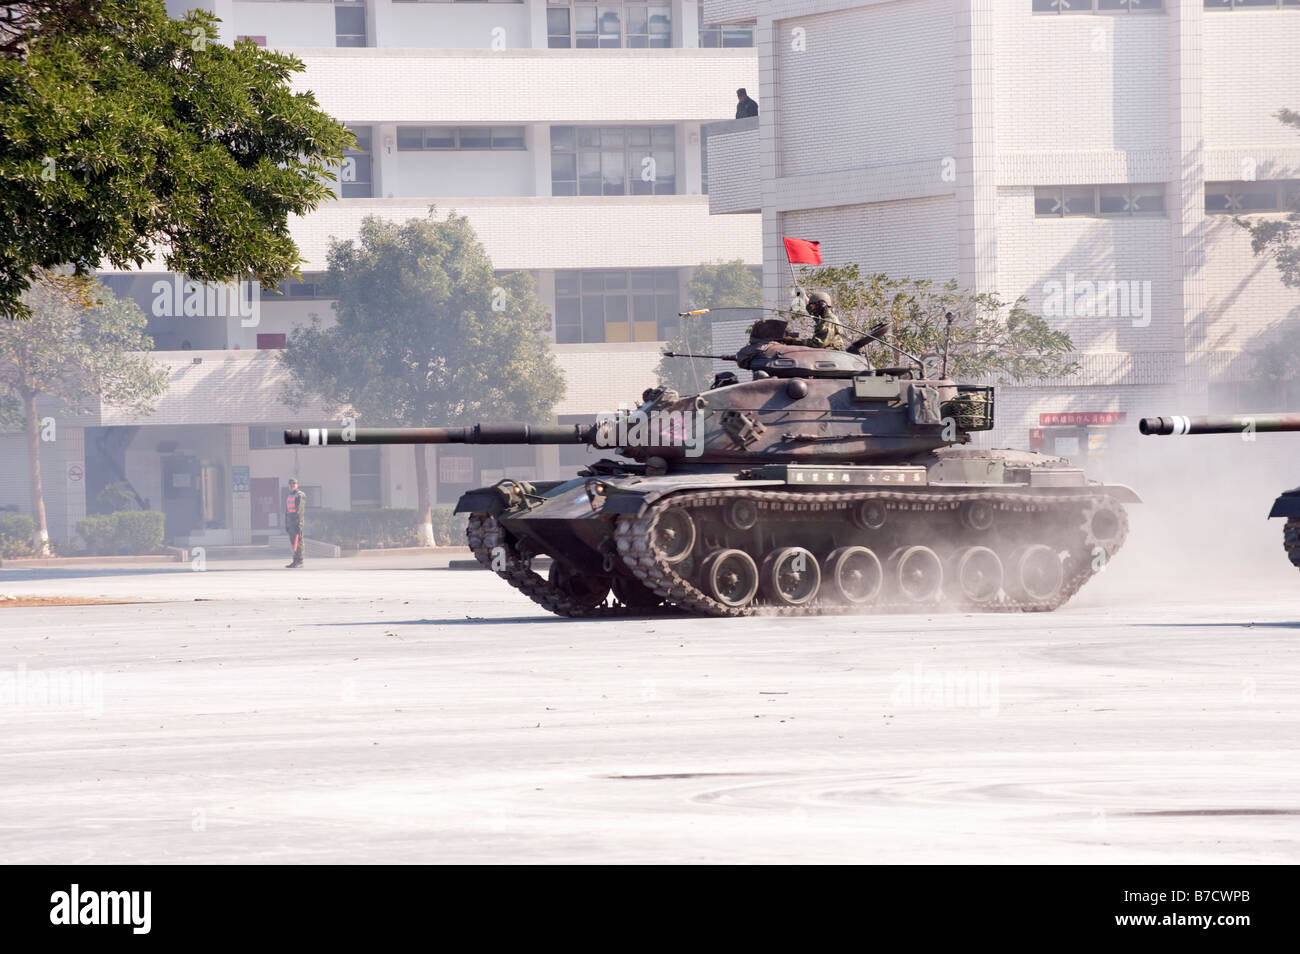 M60A3 Main Battle Tank During Military Exercises At The 58th Artillery Command, Taichung, Taiwan Stock Photo